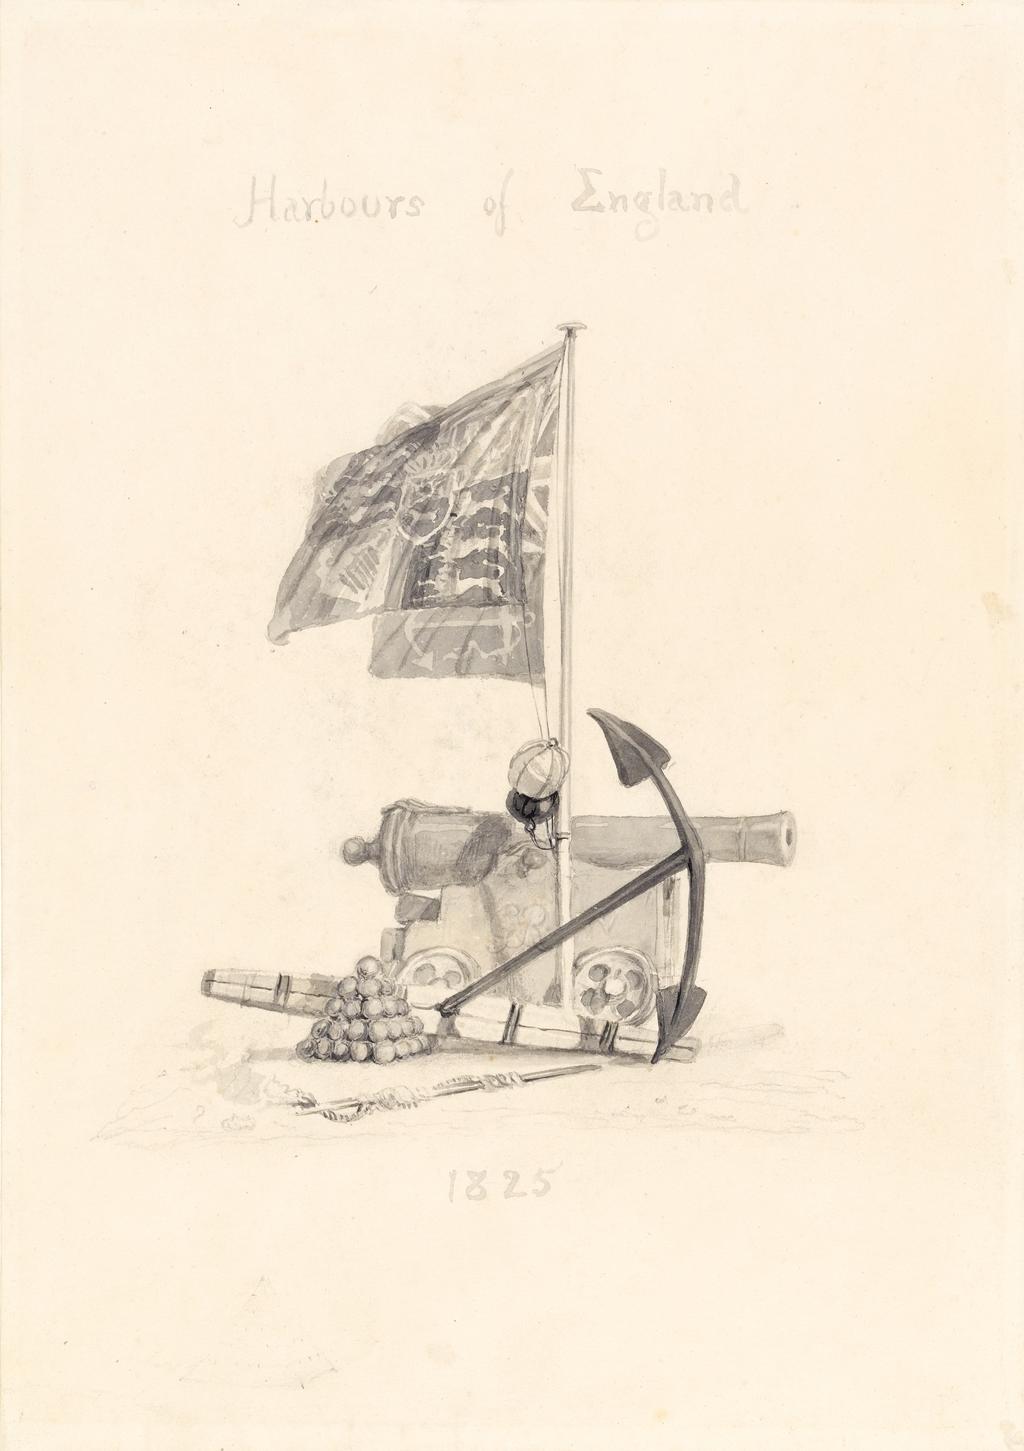 An image of Vignette for 'Ports of England'. Turner, Joseph Mallord William (British, 1775-1851). Pen and ink with grey wash over graphite on paper, height 300mm, width 211mm, 1825.